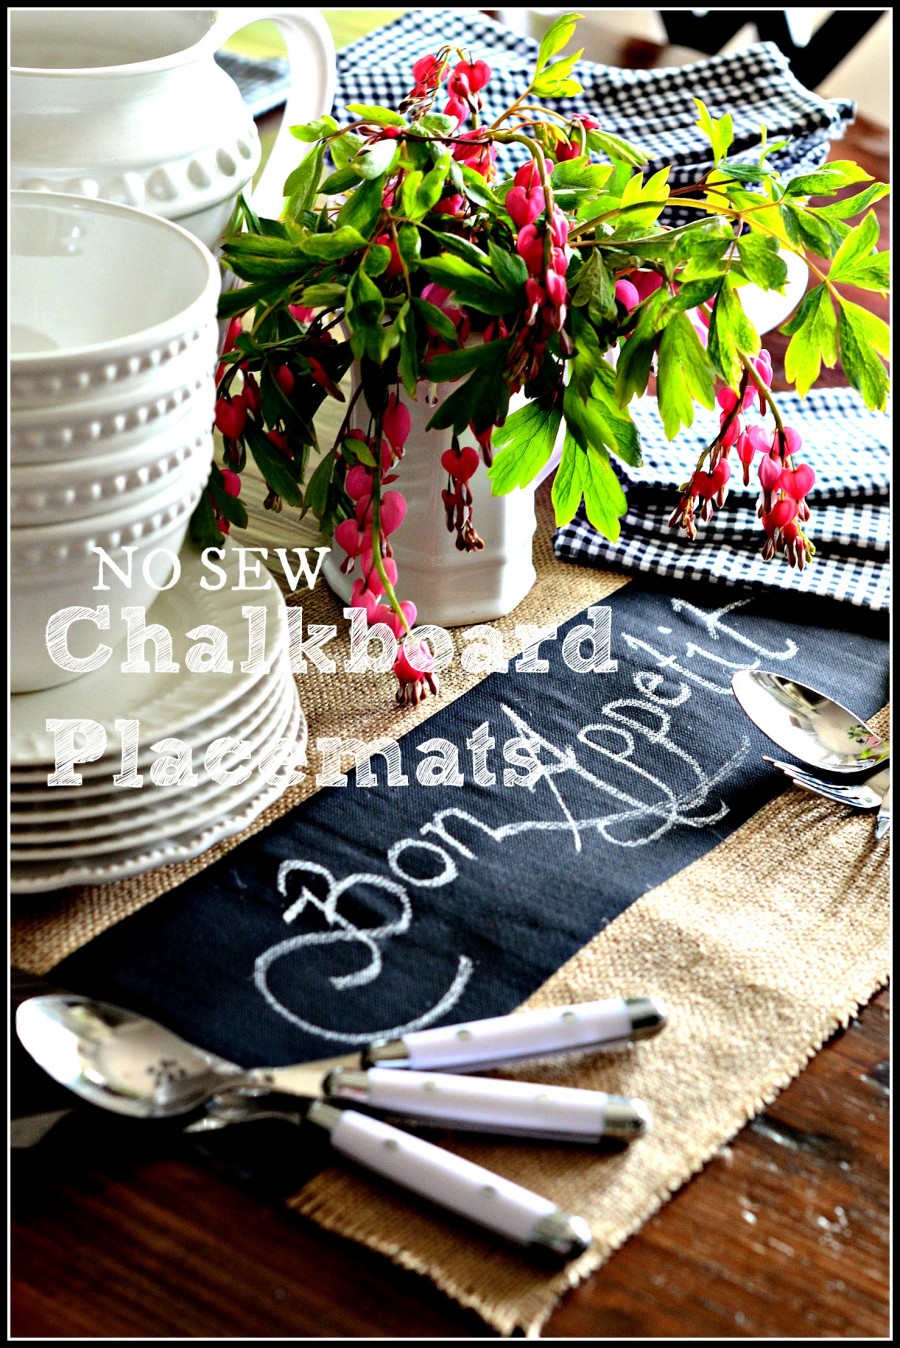 NO SEW CHALKBOARD PLACEMATS-So easy to make and fun to use!-stonegableblog.com